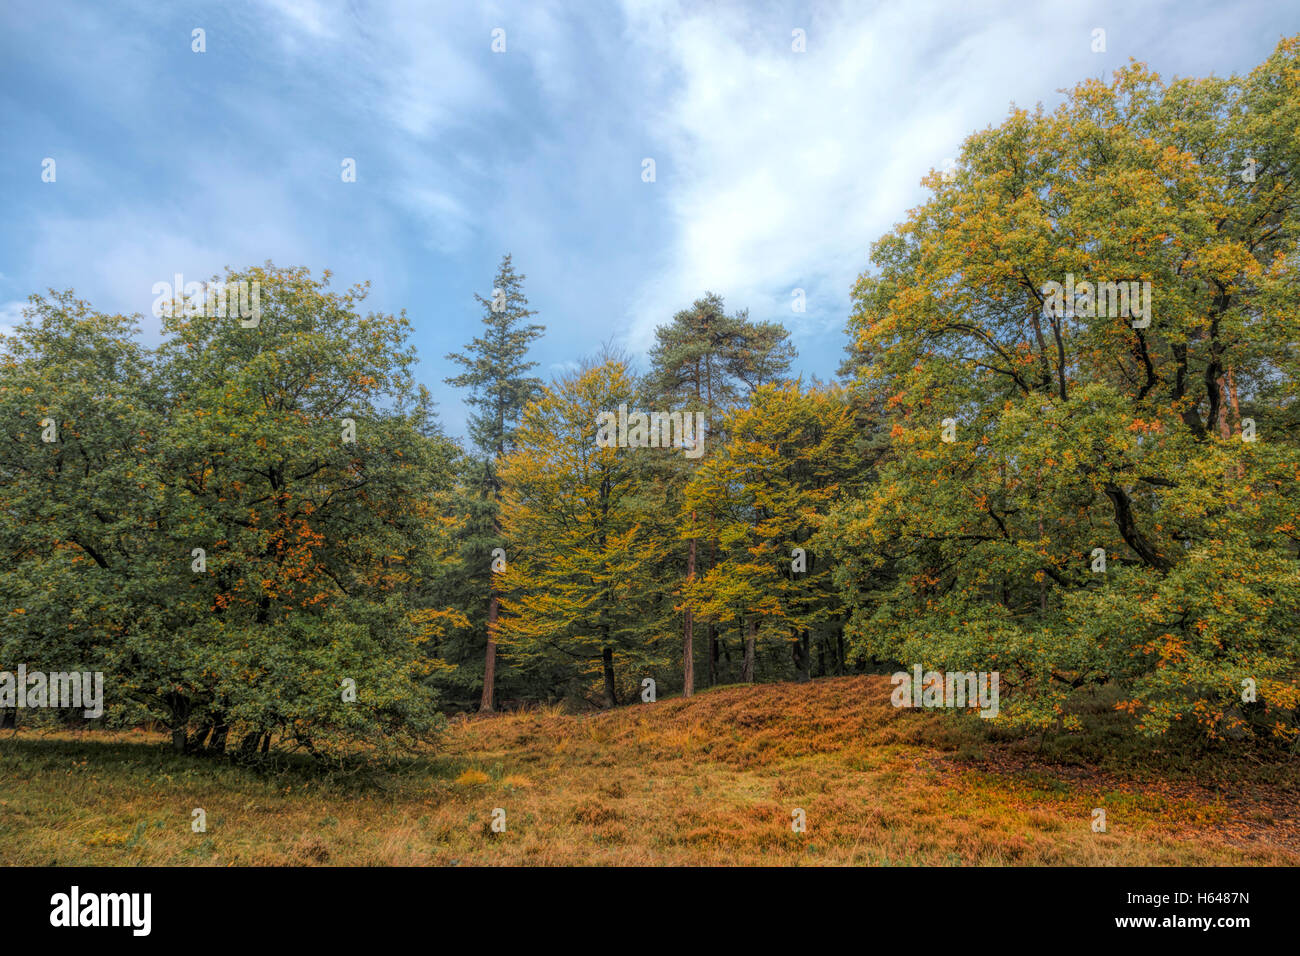 Fall colors on Loenermark, a hilly nature reserve with woods and moors, Loenen, Veluwe area, Gelderland, The Netherlands. Stock Photo